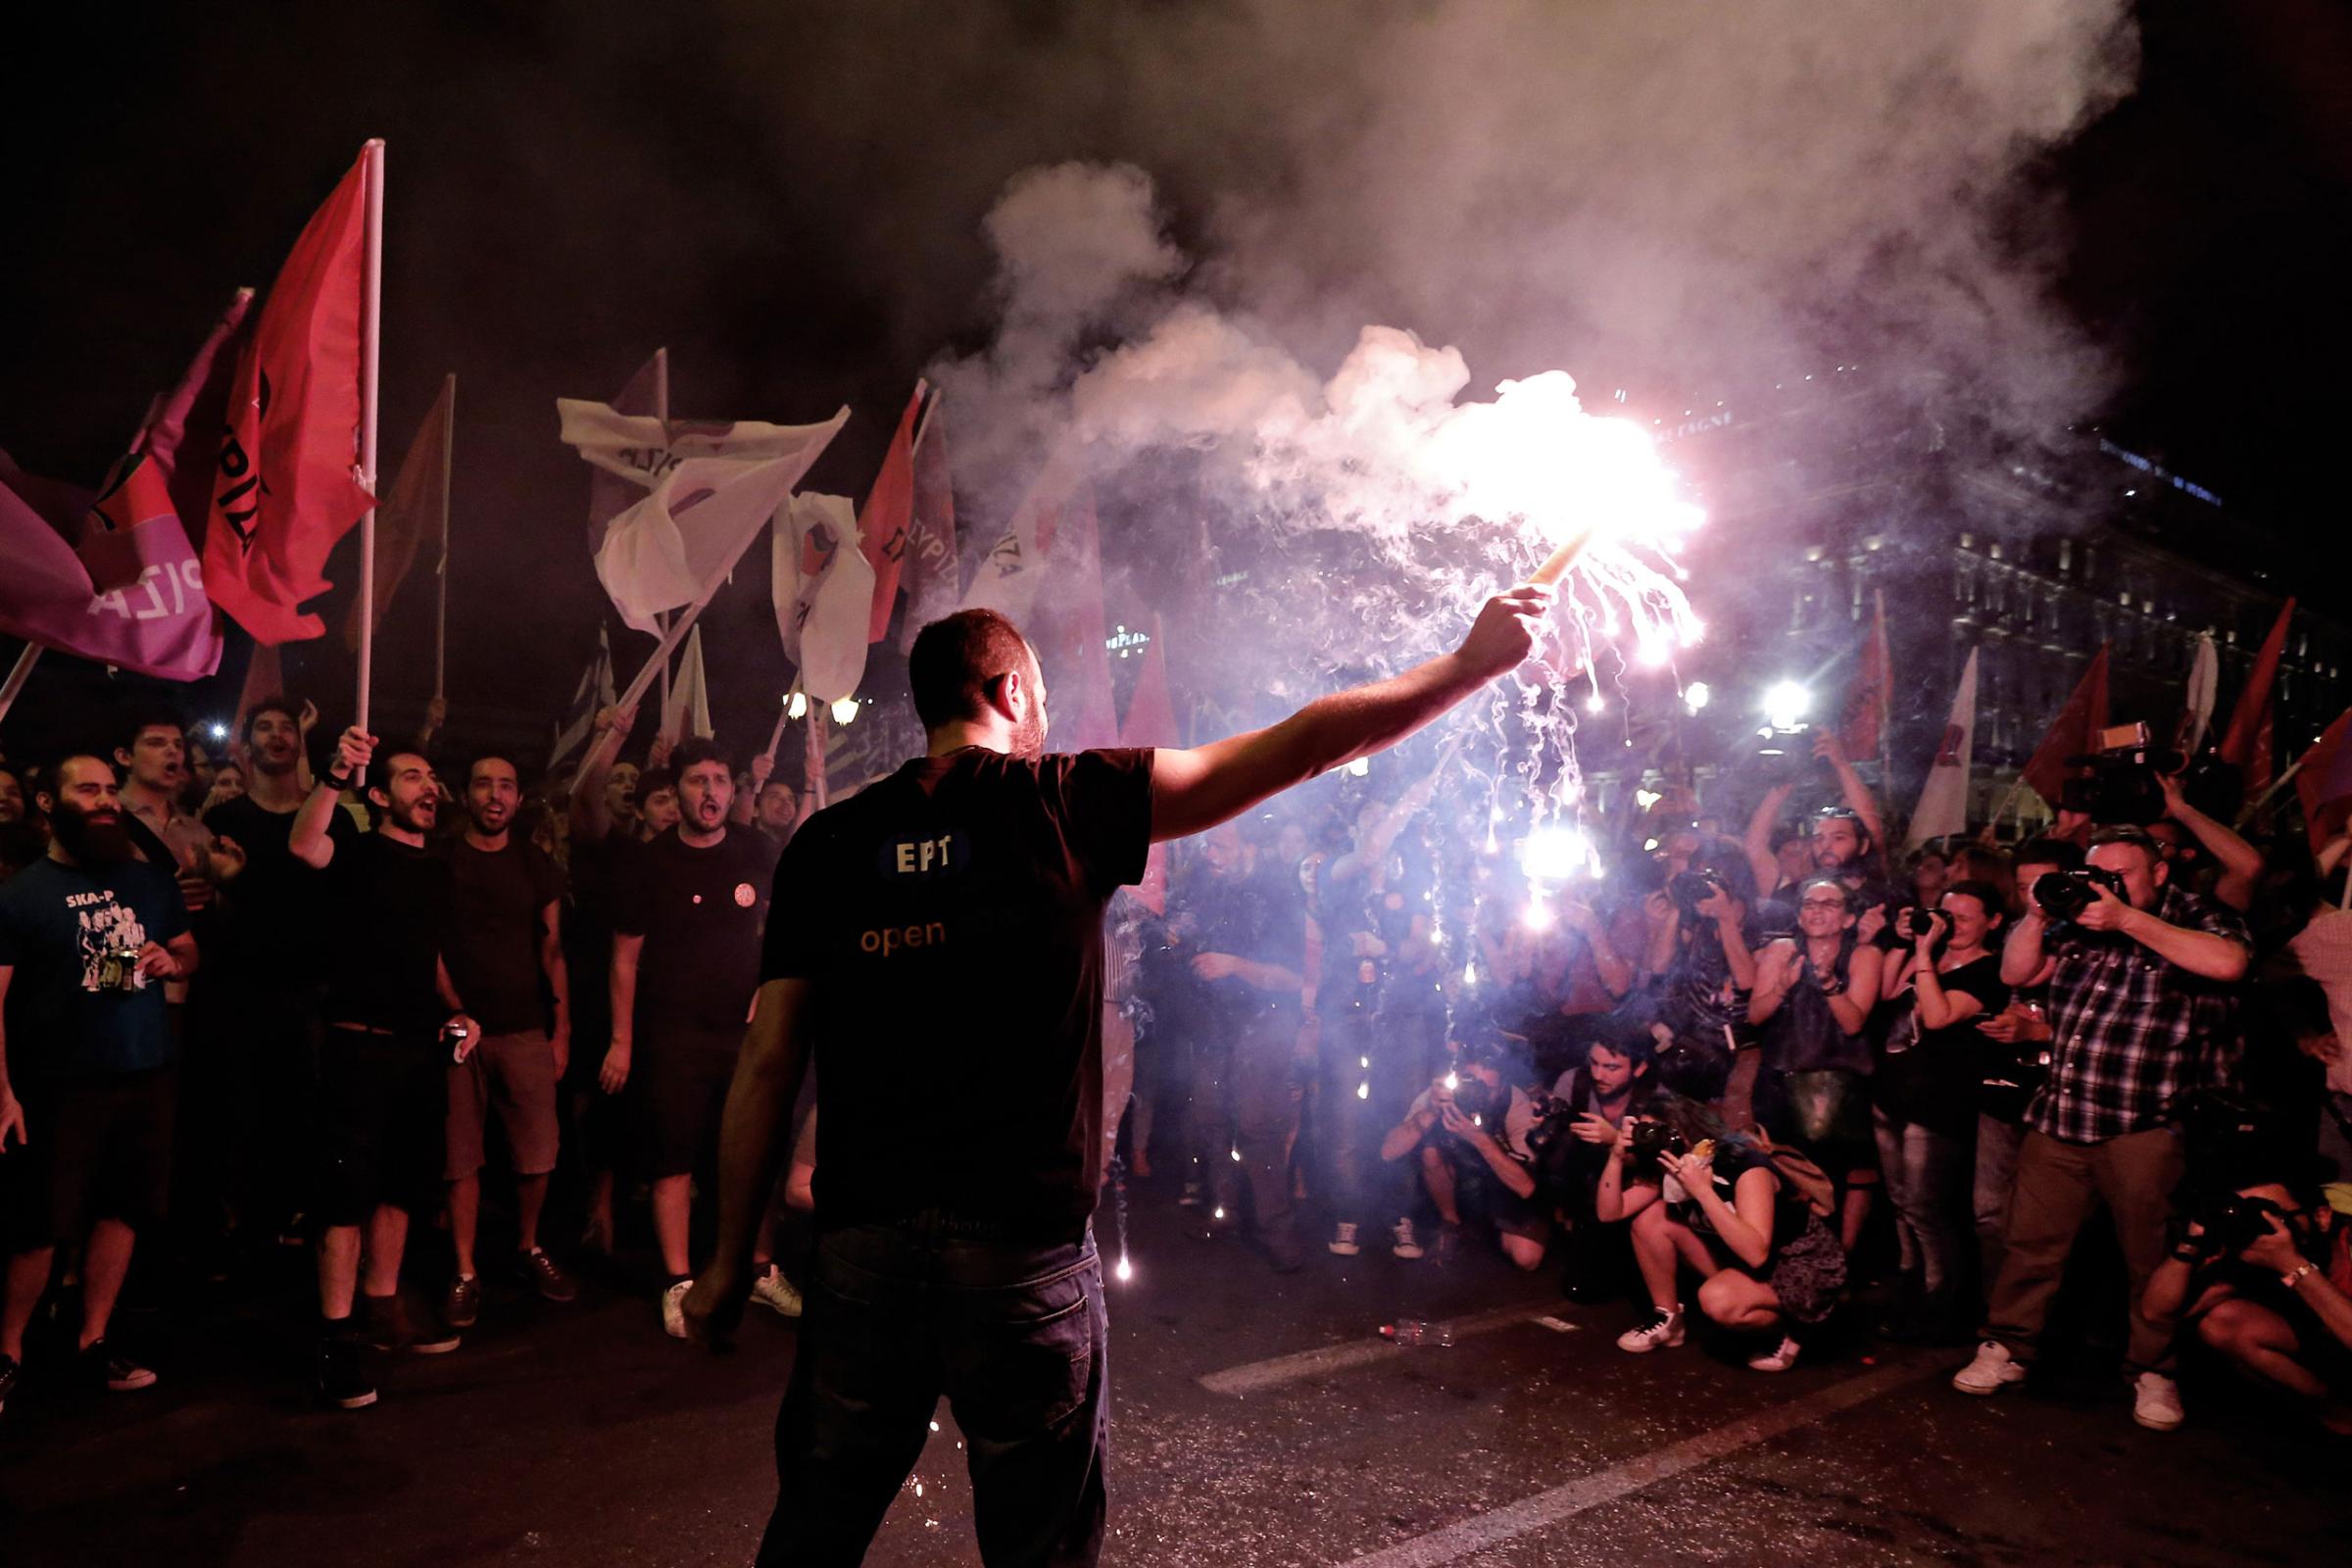 "No" supporters celebrate the referendum results on a street in central in Athens.